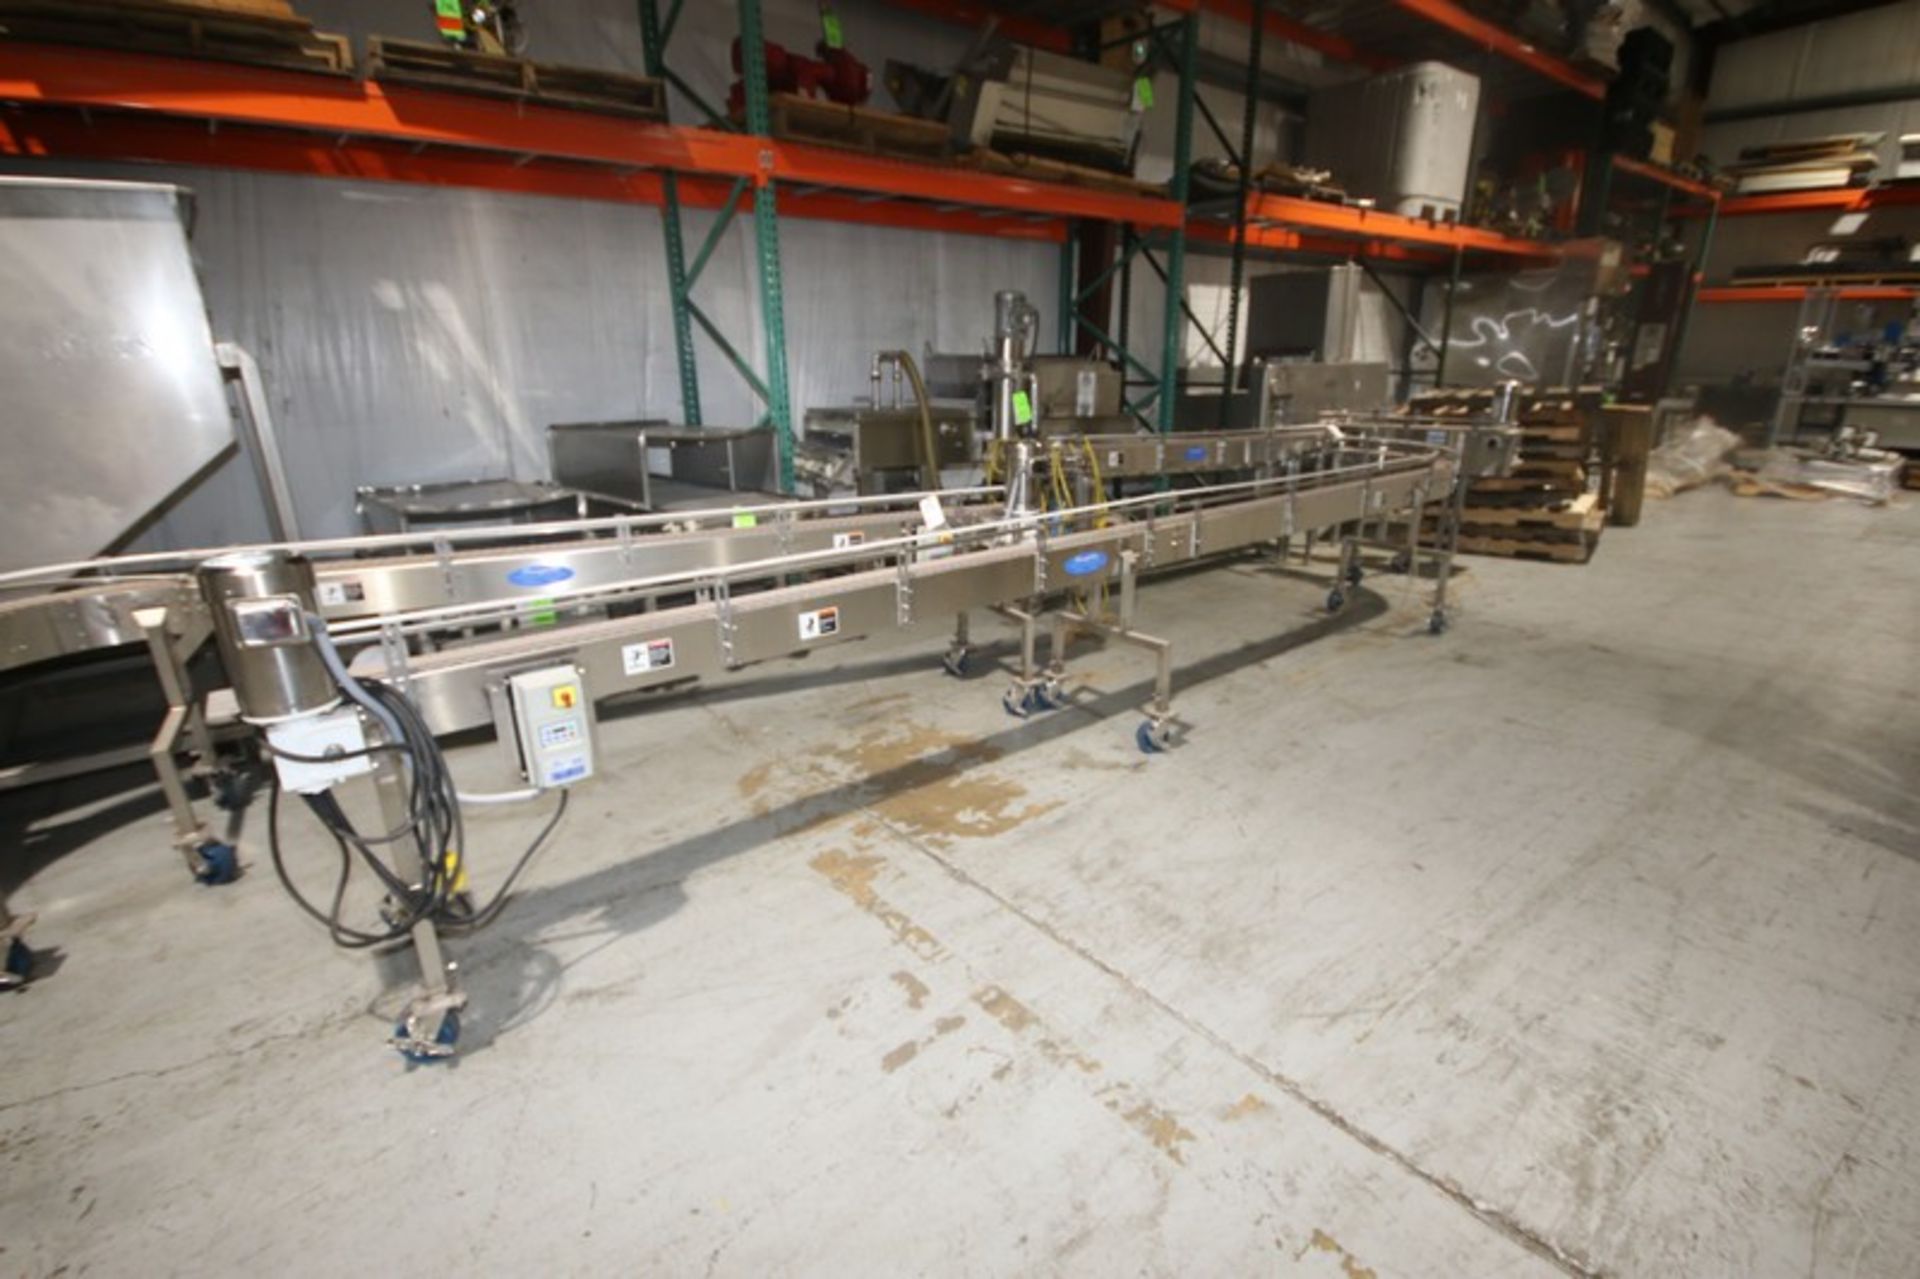 Laughlin S/S Section of Conveyor,with Straight Section & 90 Degree Turn, Overall Length: Aprox. 264"